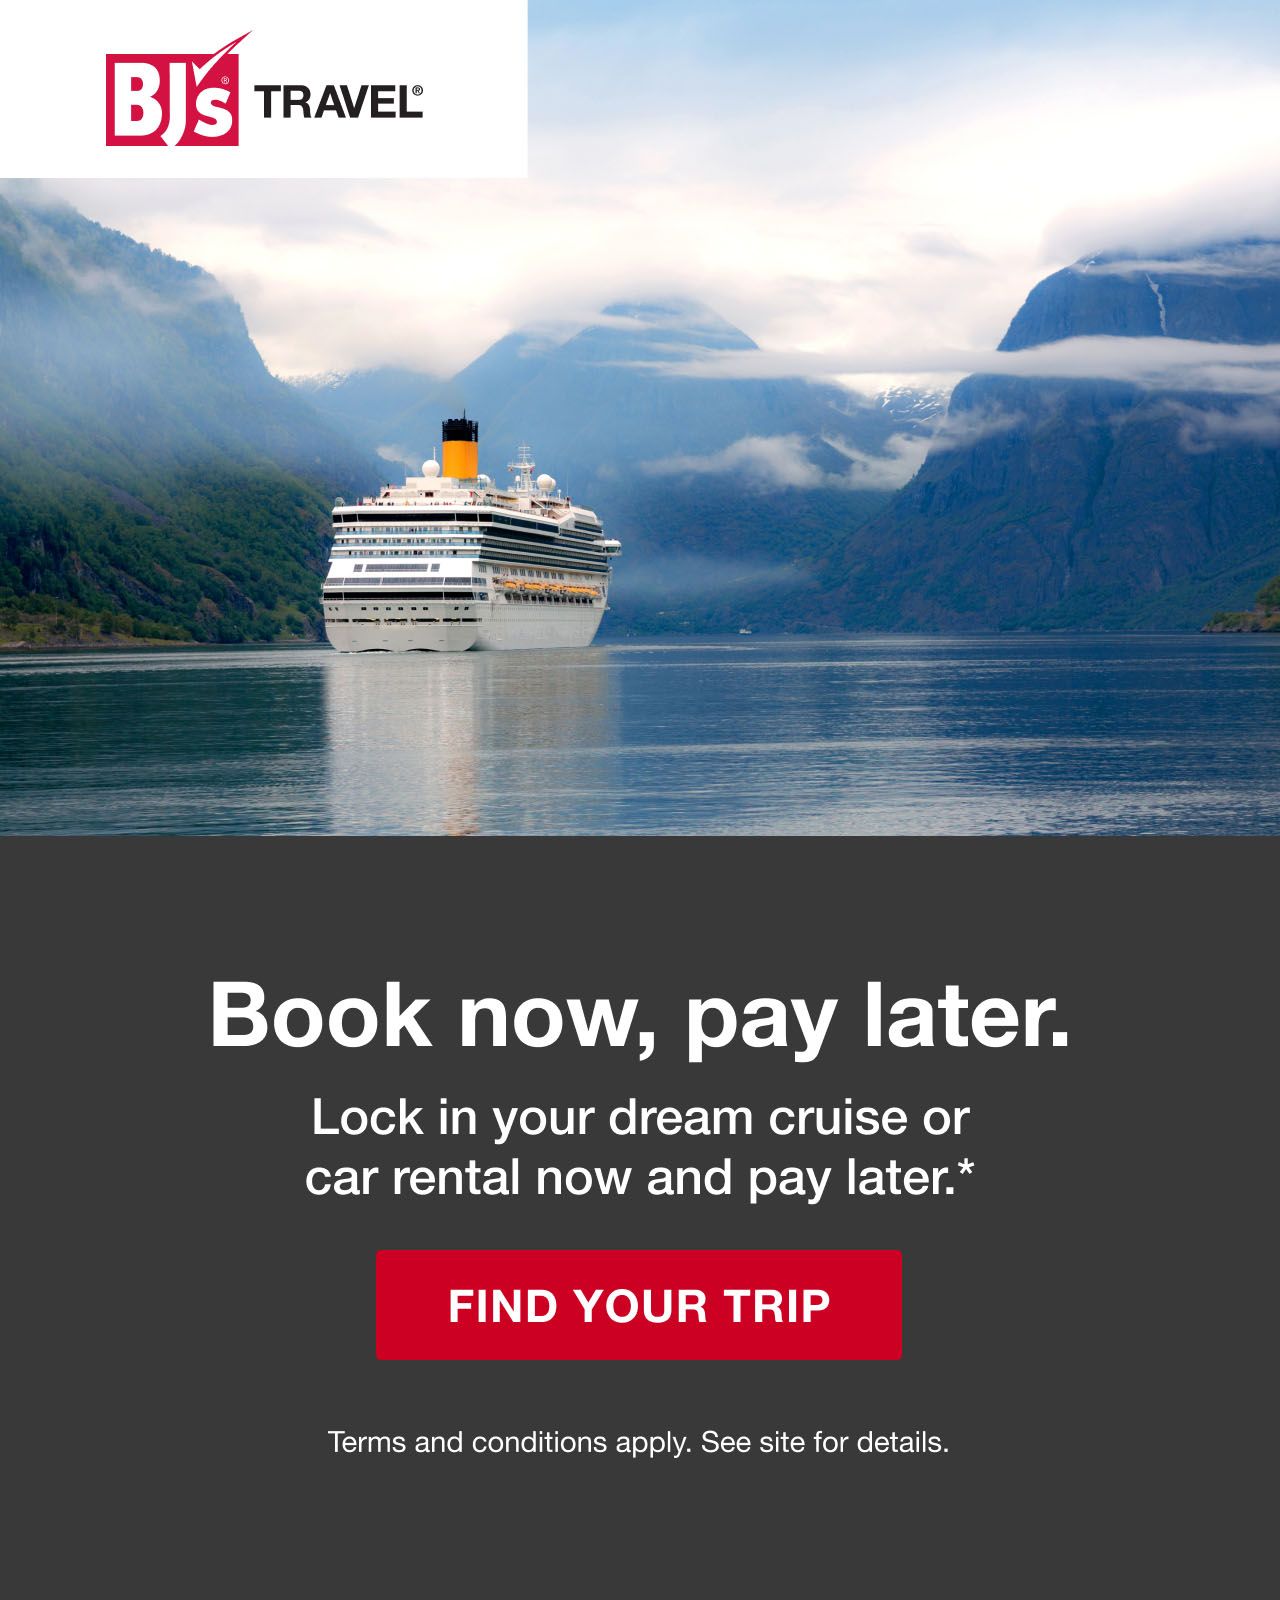 Book now, pay later. Lock in your dream cruise or car rental now and pay later.* Click here to find your trip. Terms and conditions apply. See site for details.